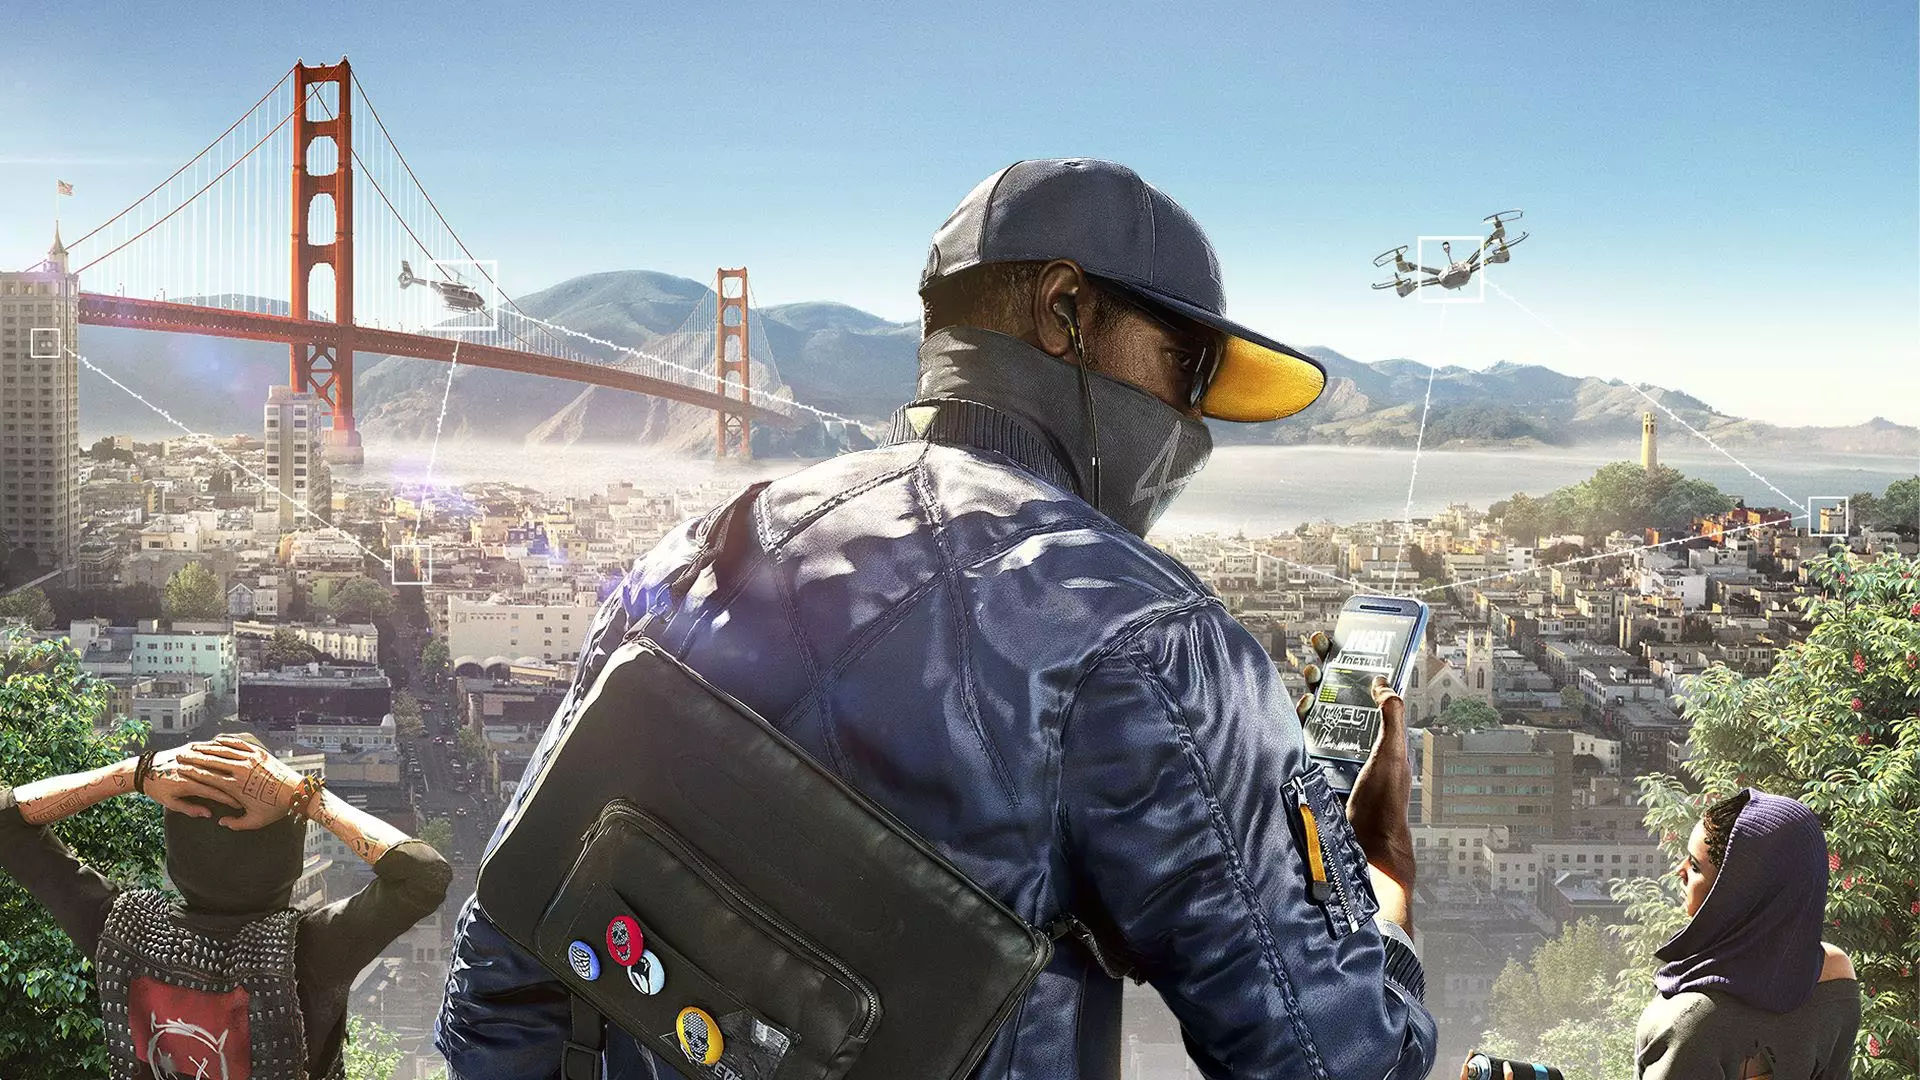 Watch Dogs 2 was set in the tech hub of the world, San Francisco